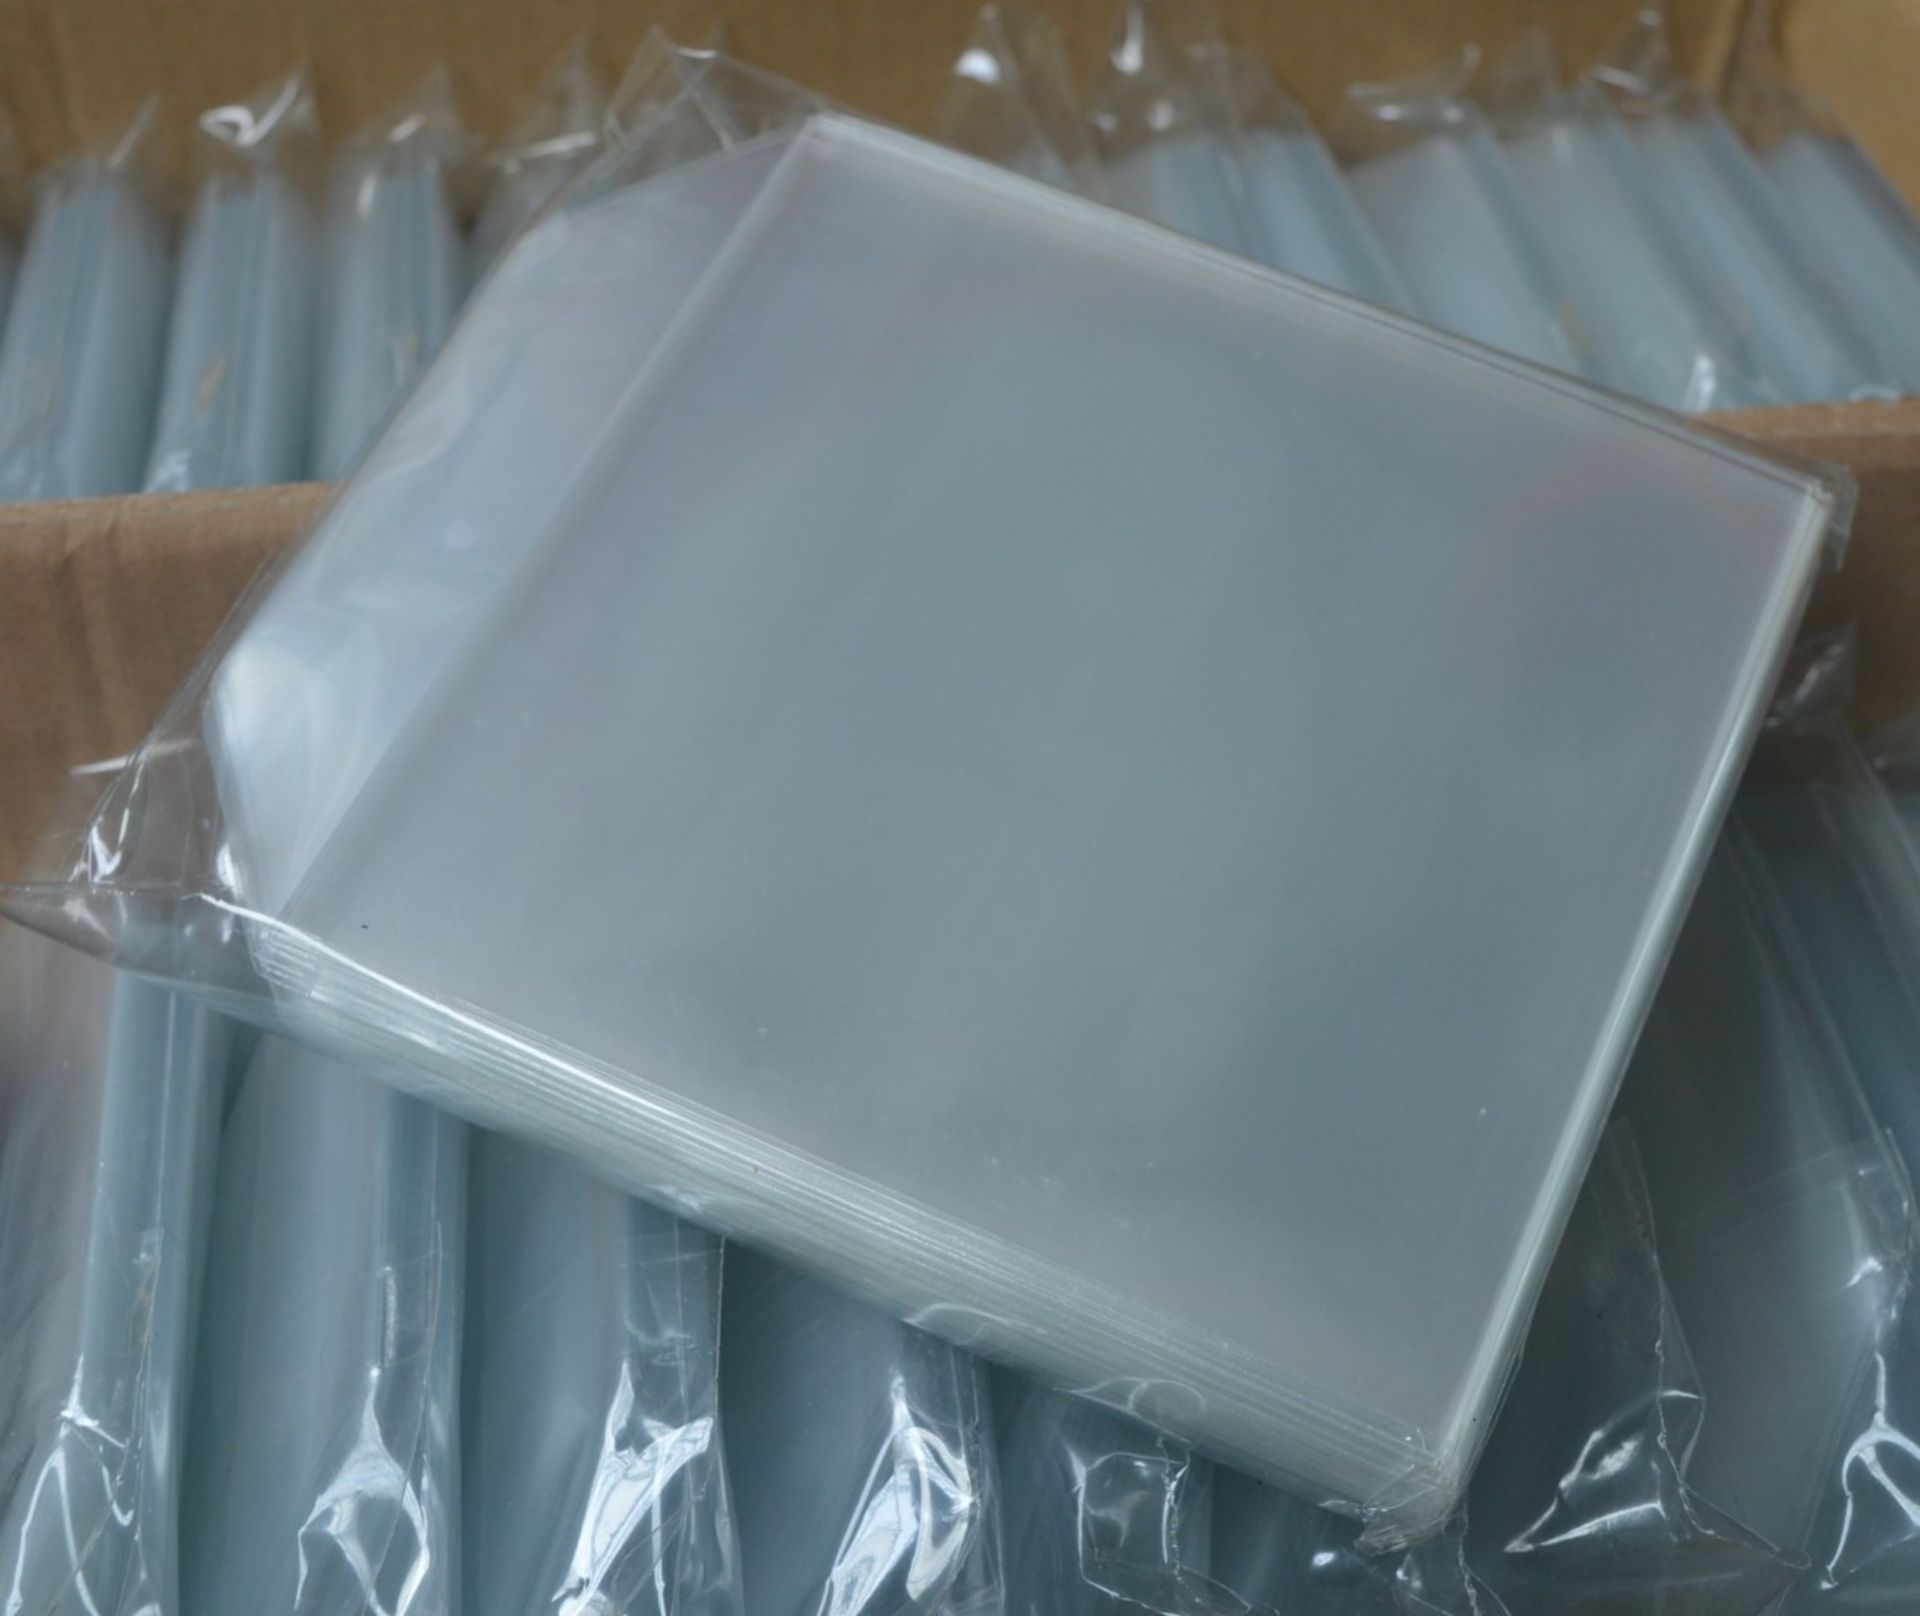 1,000 x Clear Plastic CD or DVD Sleeves With Flaps - Includes 10 x Packs of 100 Sleeves - Brand